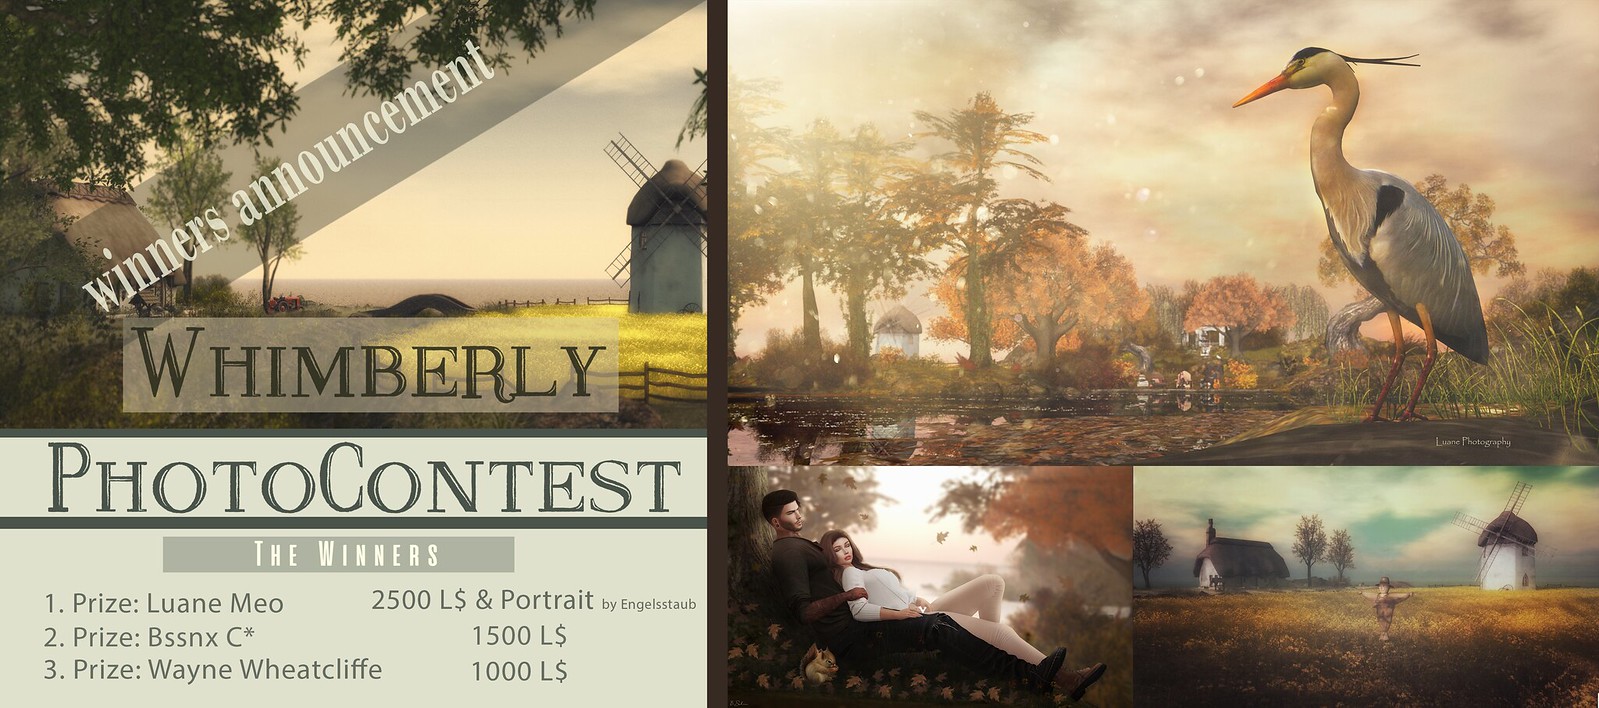 Whimberly Photocontest Winners Announcement